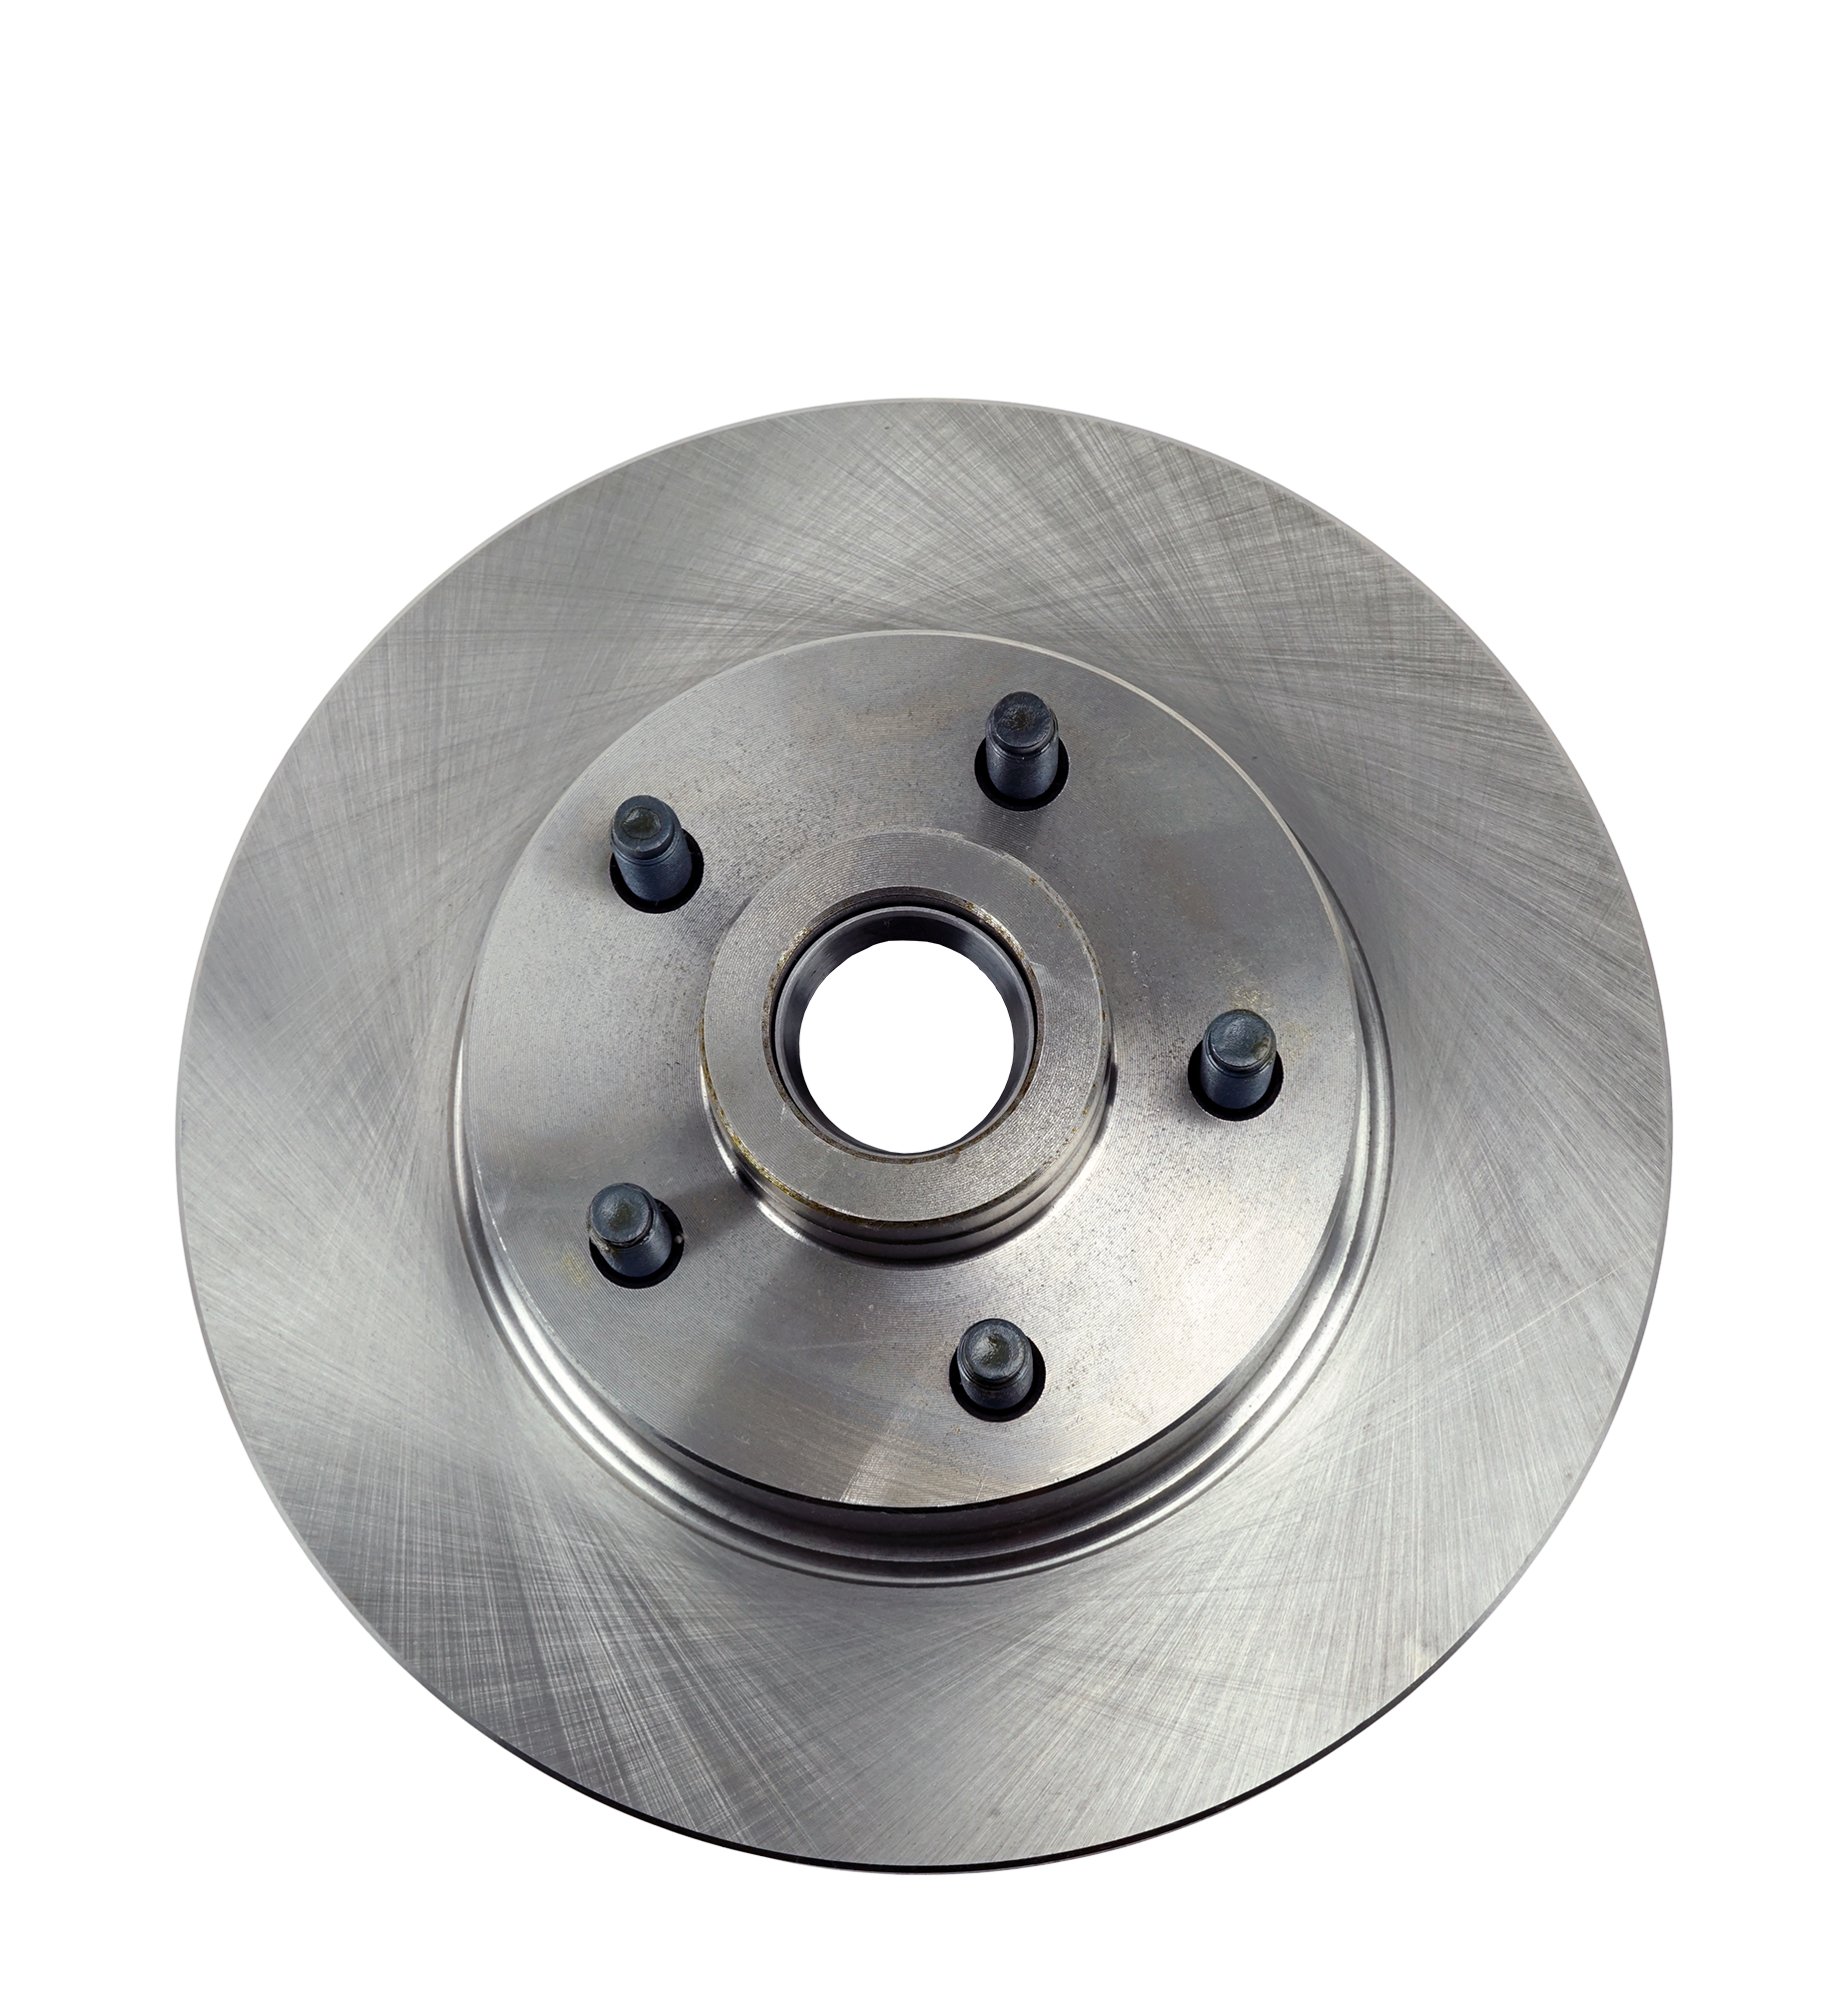 11-inch-plain-vented-rotor-size-label